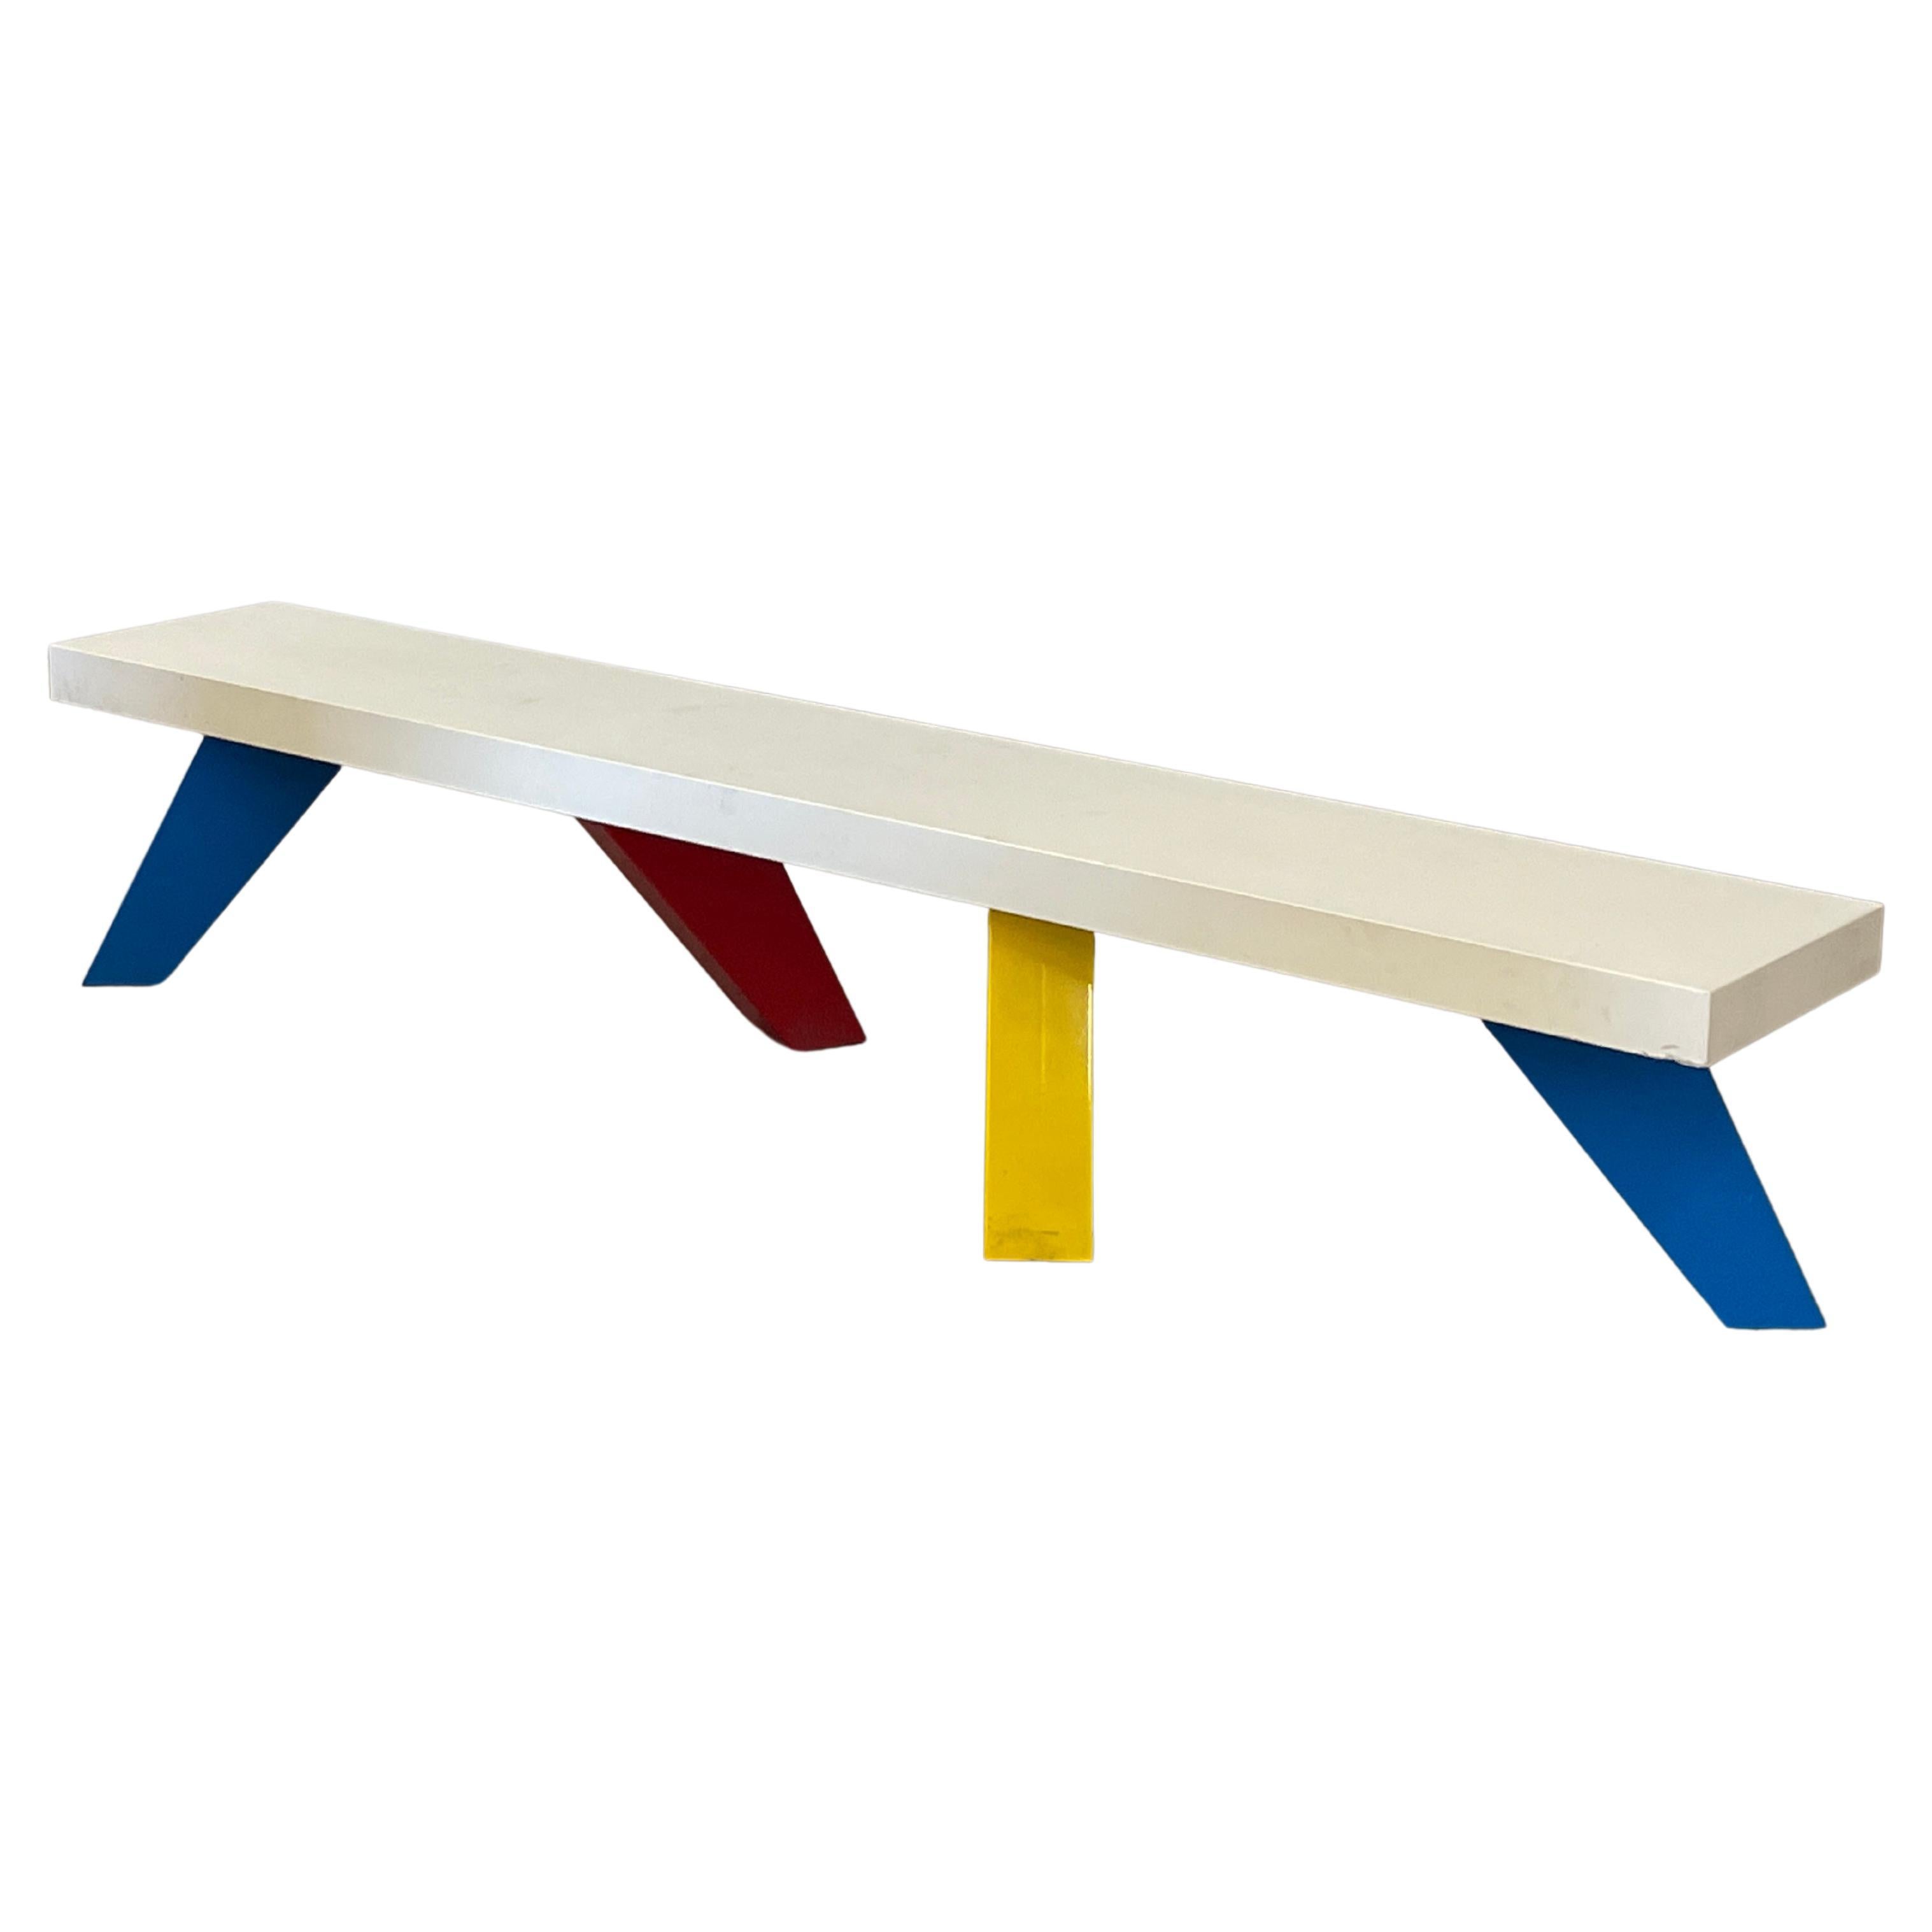 Giorgio Cattano Mammut (Mammoth) bench for Cleto Munari, Italy limited edition For Sale